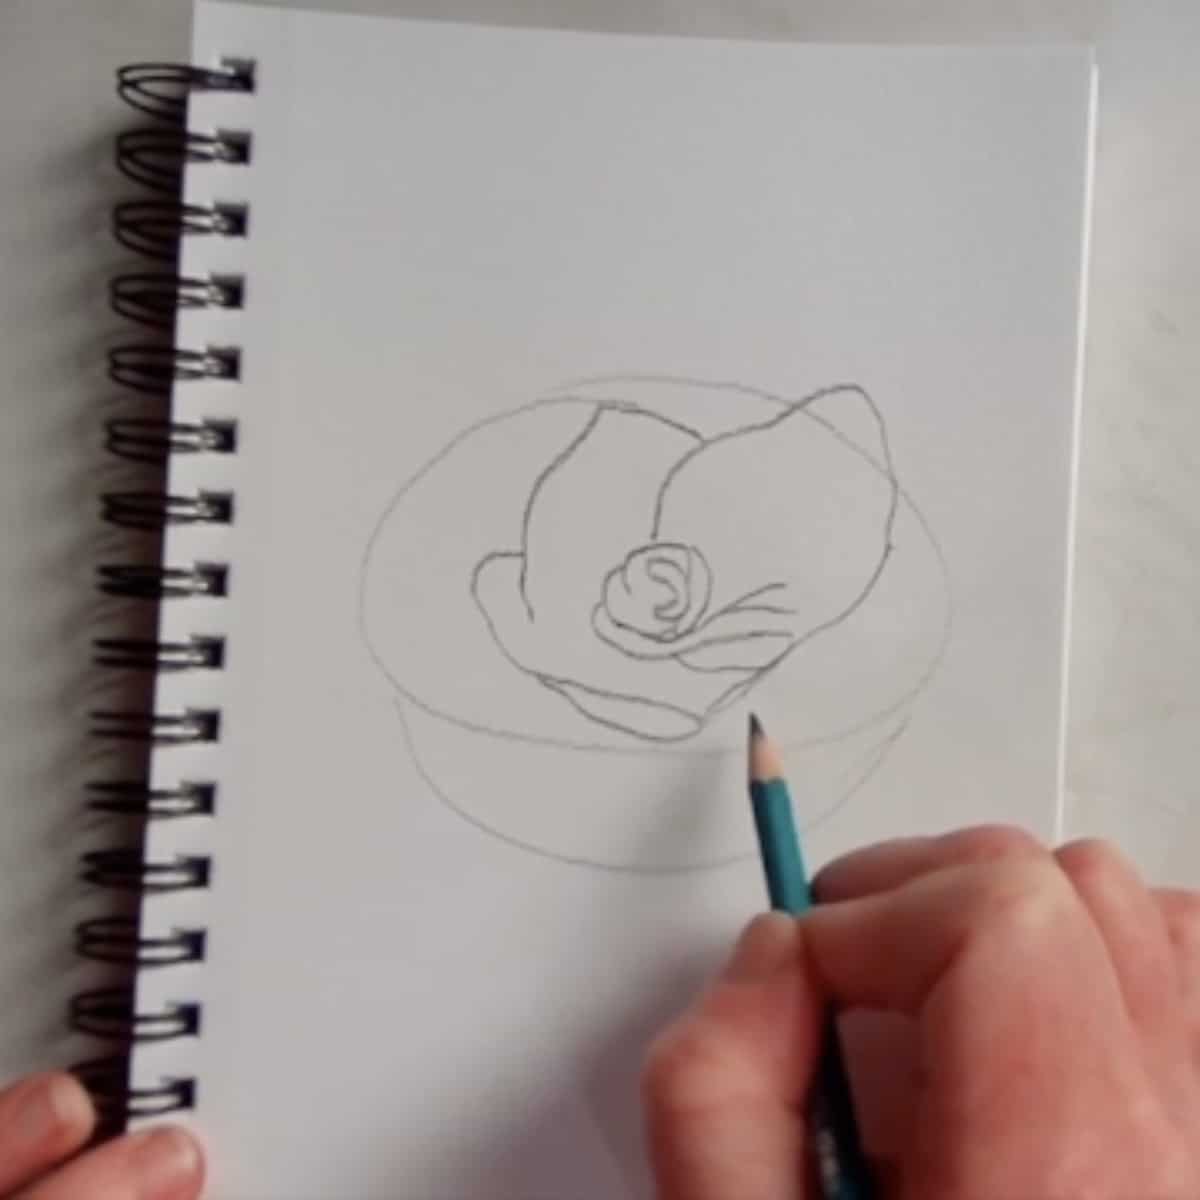 Starting from the center, draw in the petals